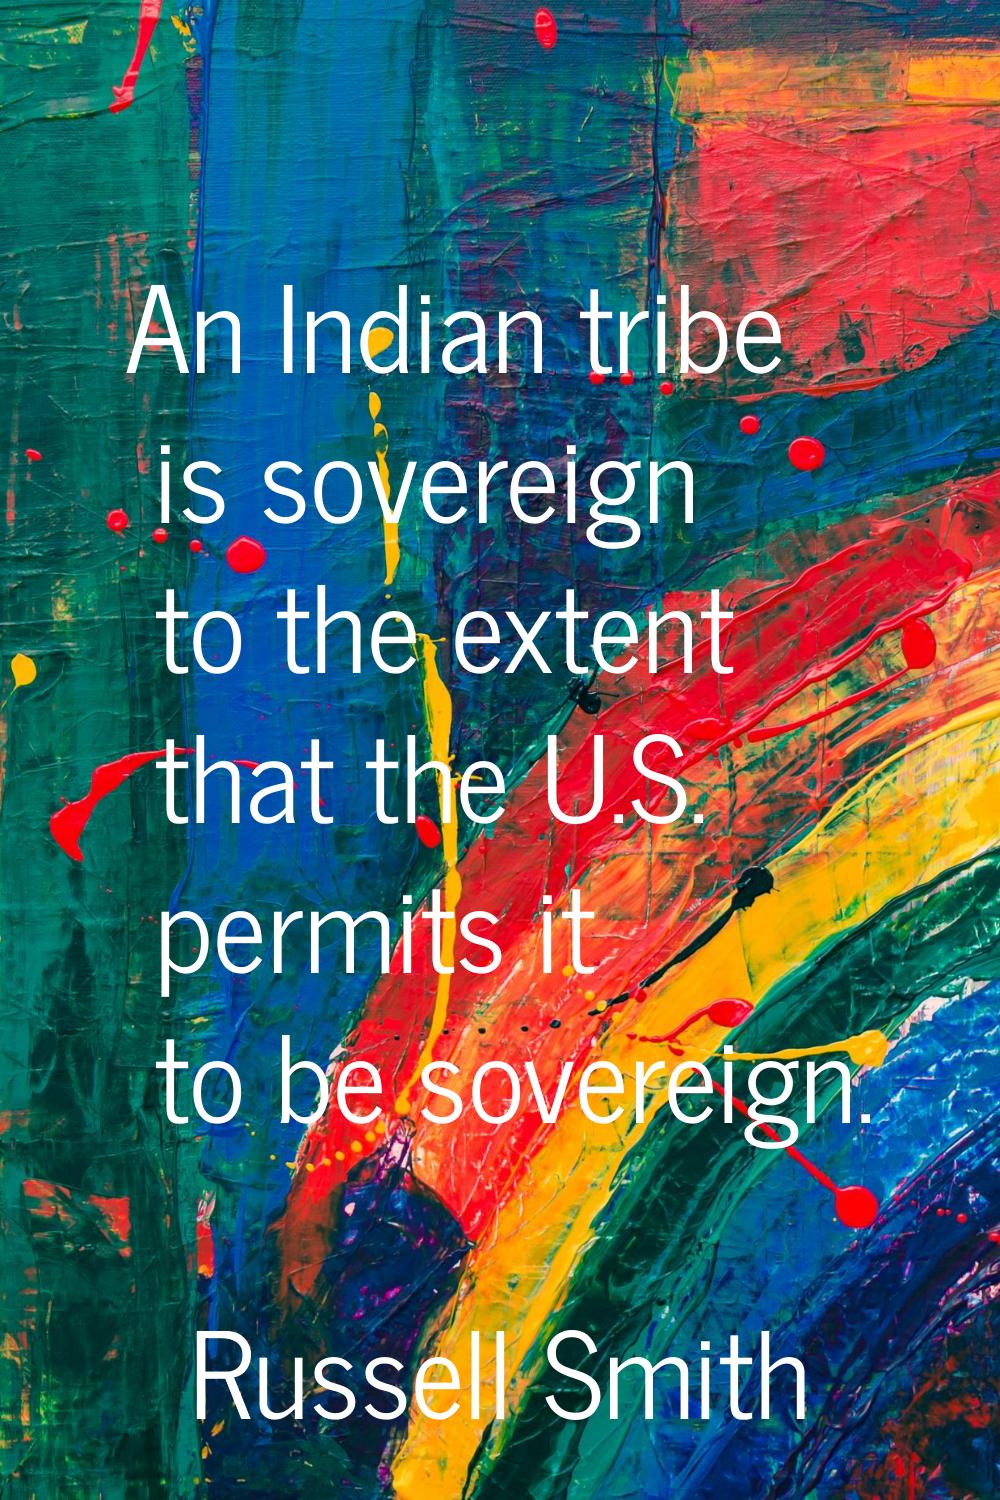 An Indian tribe is sovereign to the extent that the U.S. permits it to be sovereign.